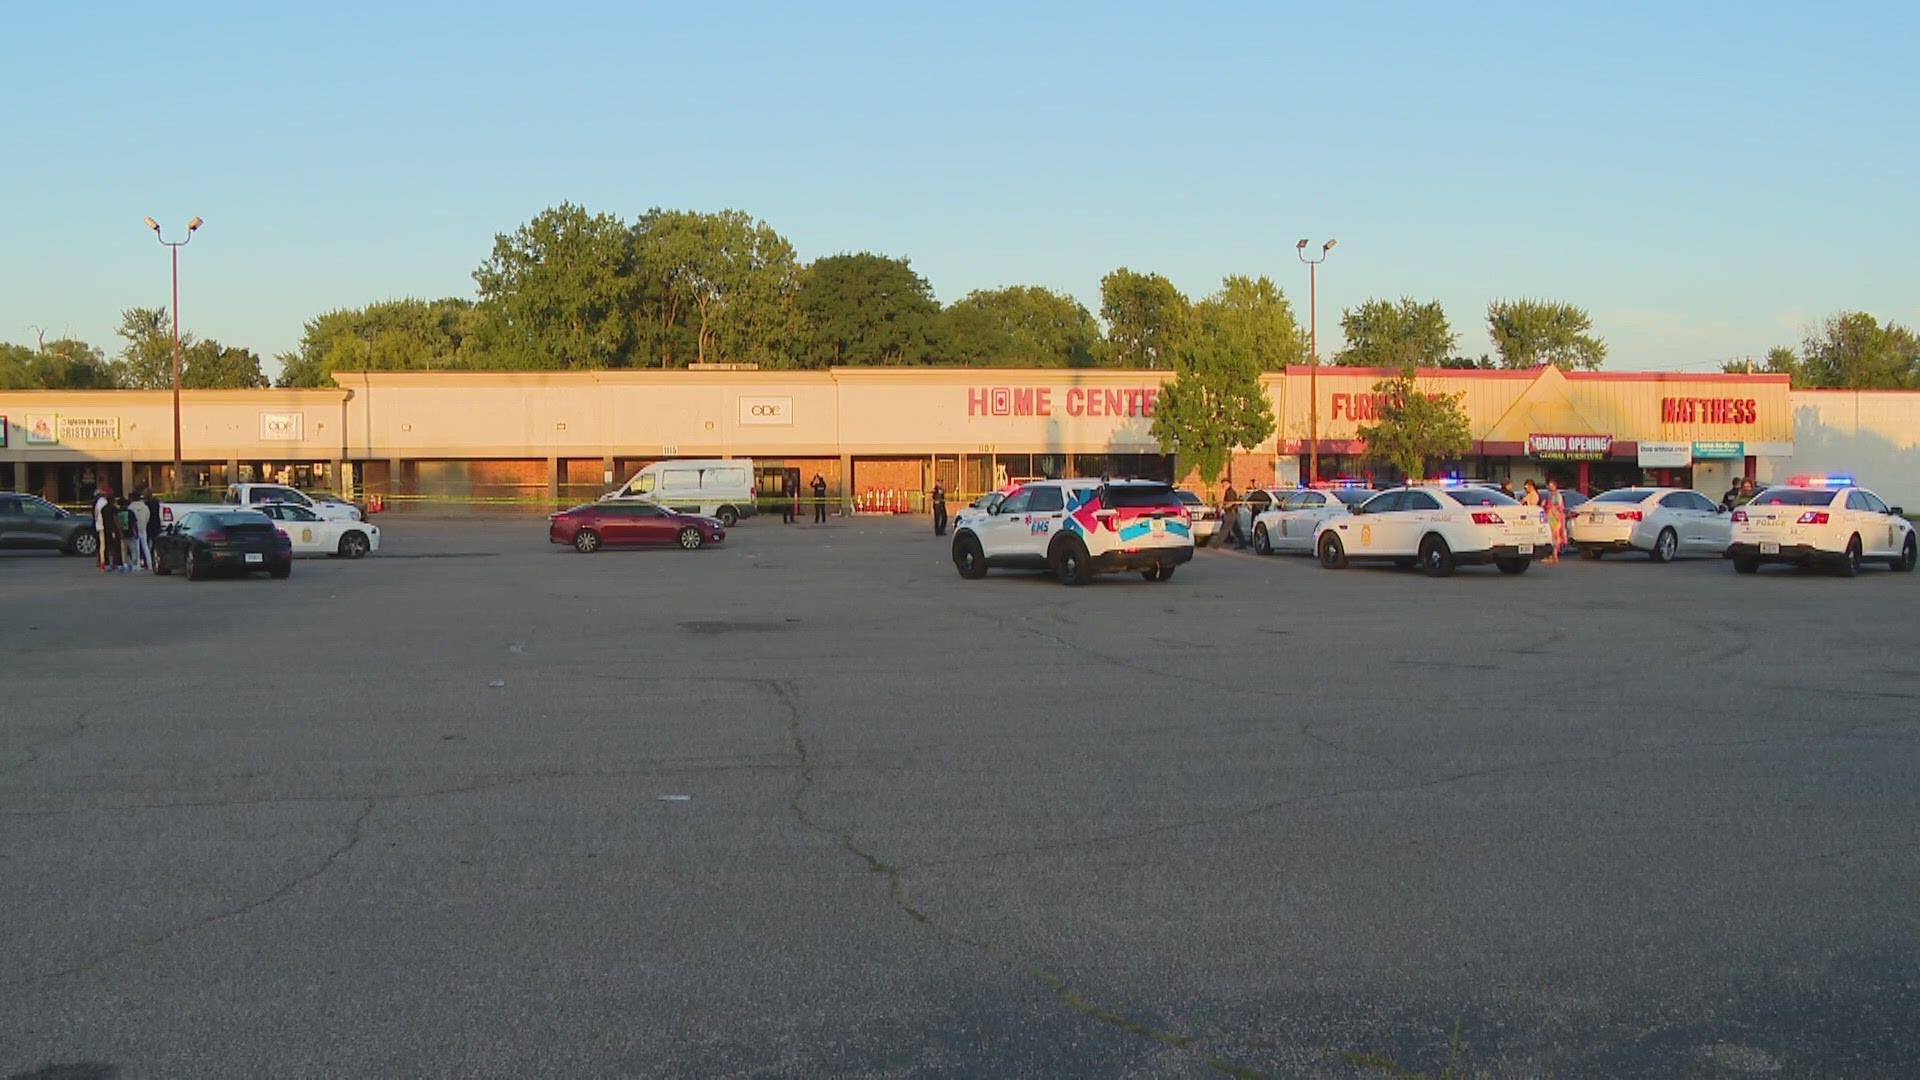 IMPD says the shots were fired in the parking lot of the Arlington Square strip mall.